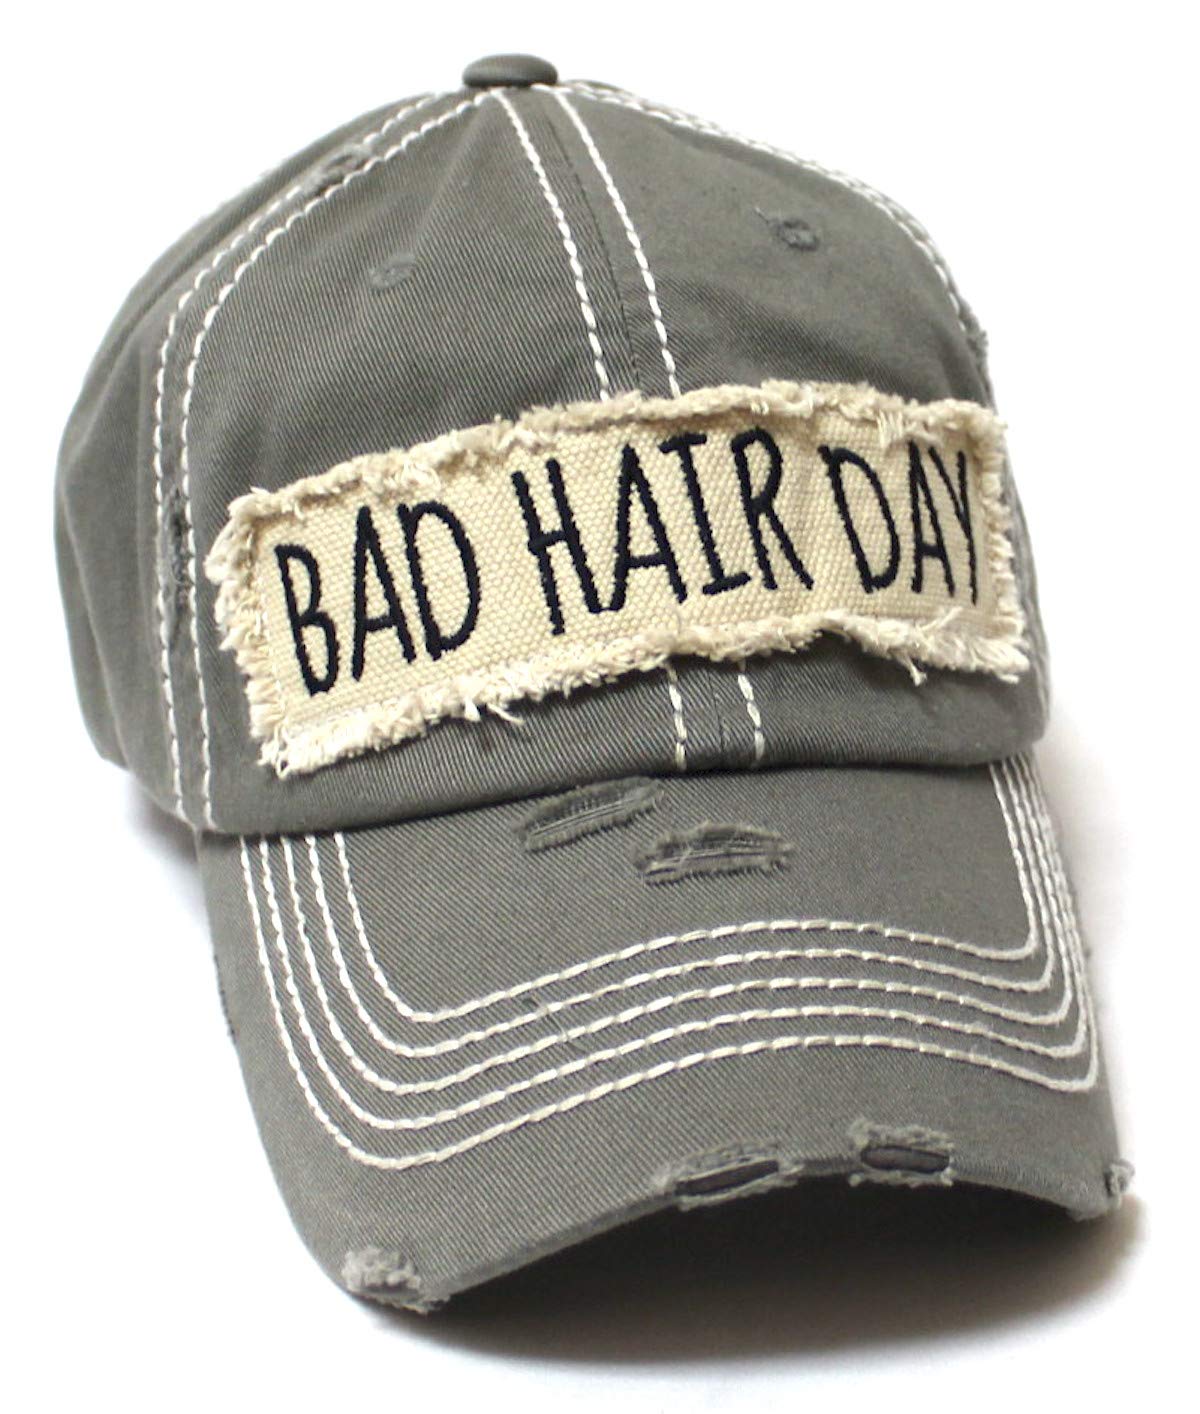 CAPS 'N VINTAGE Women's Ballcap Bad Hair Day Patch Embroidery Baseball Hat, Moss Grey